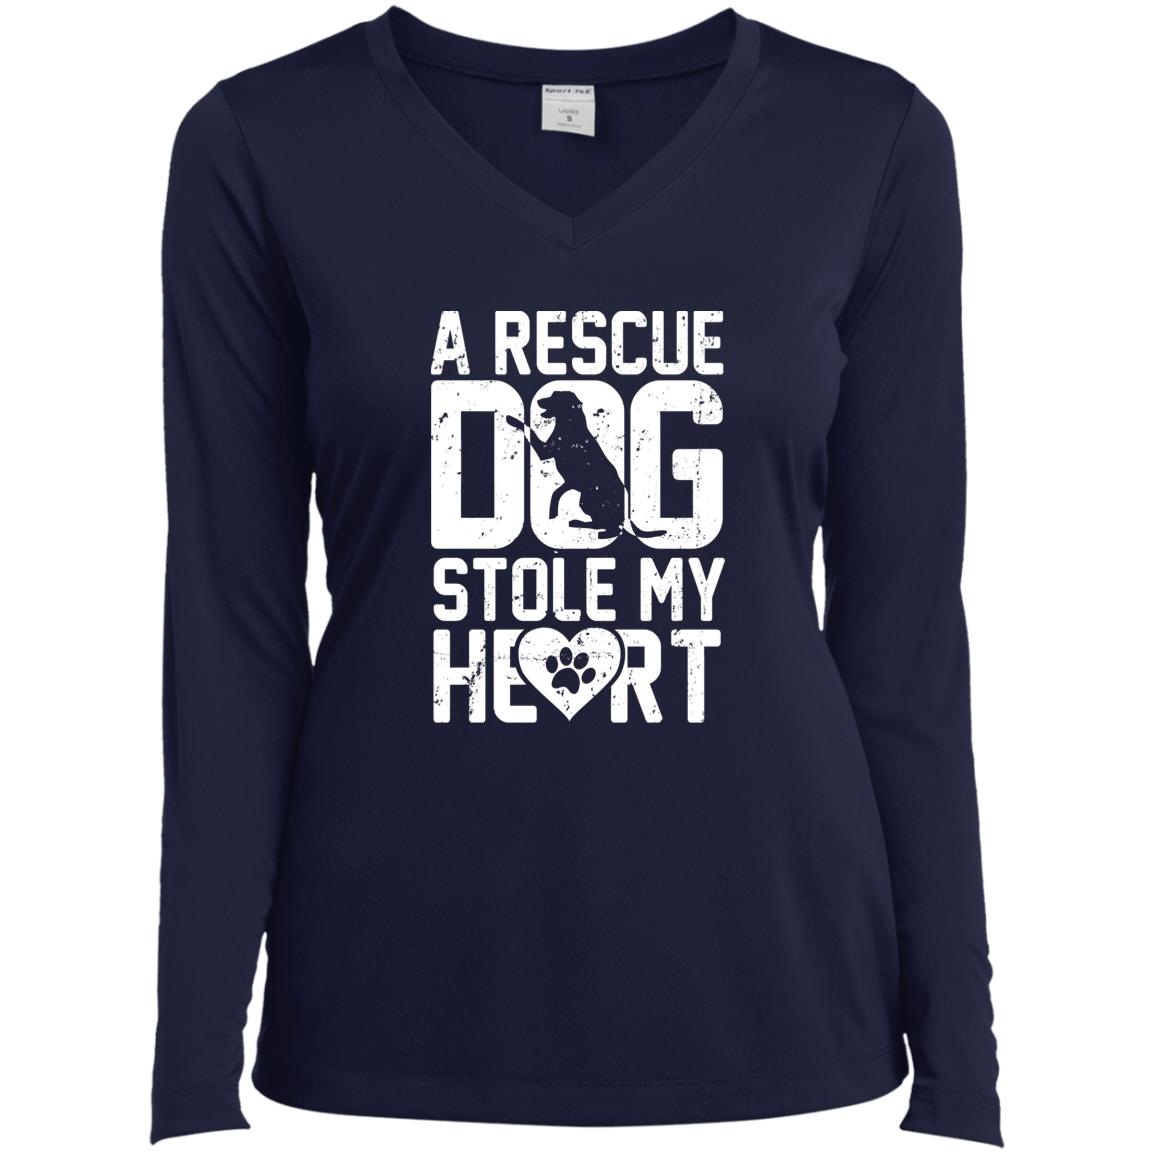 A Rescue Dog Stole My Heart  - Long Sleeve Ladies V Neck.